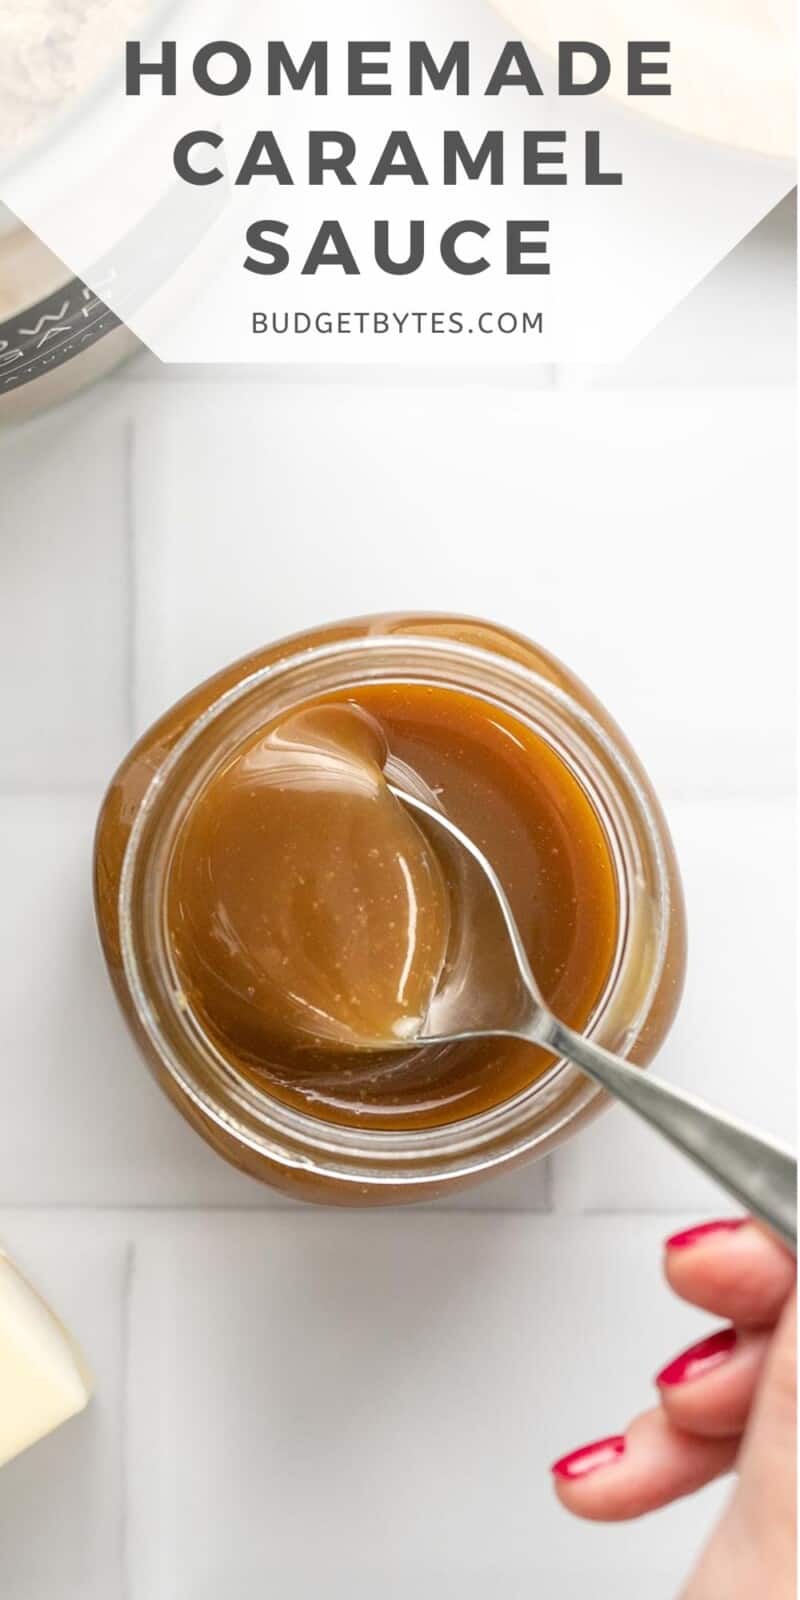 Overhead shot of a spoon taking caranel sauce out of a mason jar.